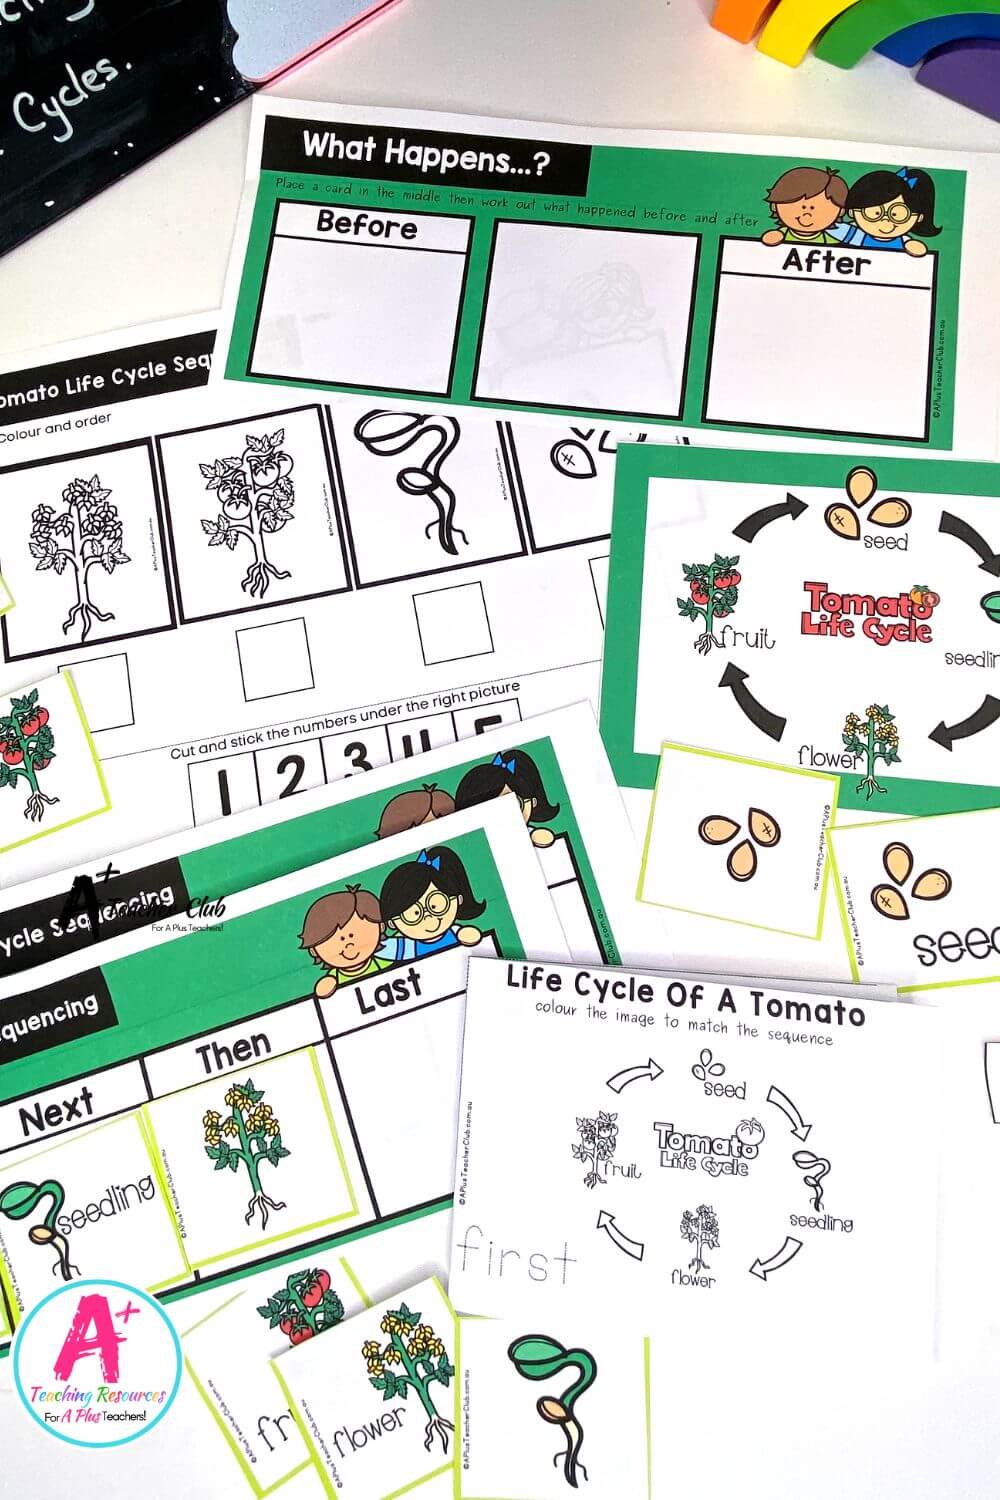 Life Cycle Sequencing 4 Steps - Tomato Activities Pack